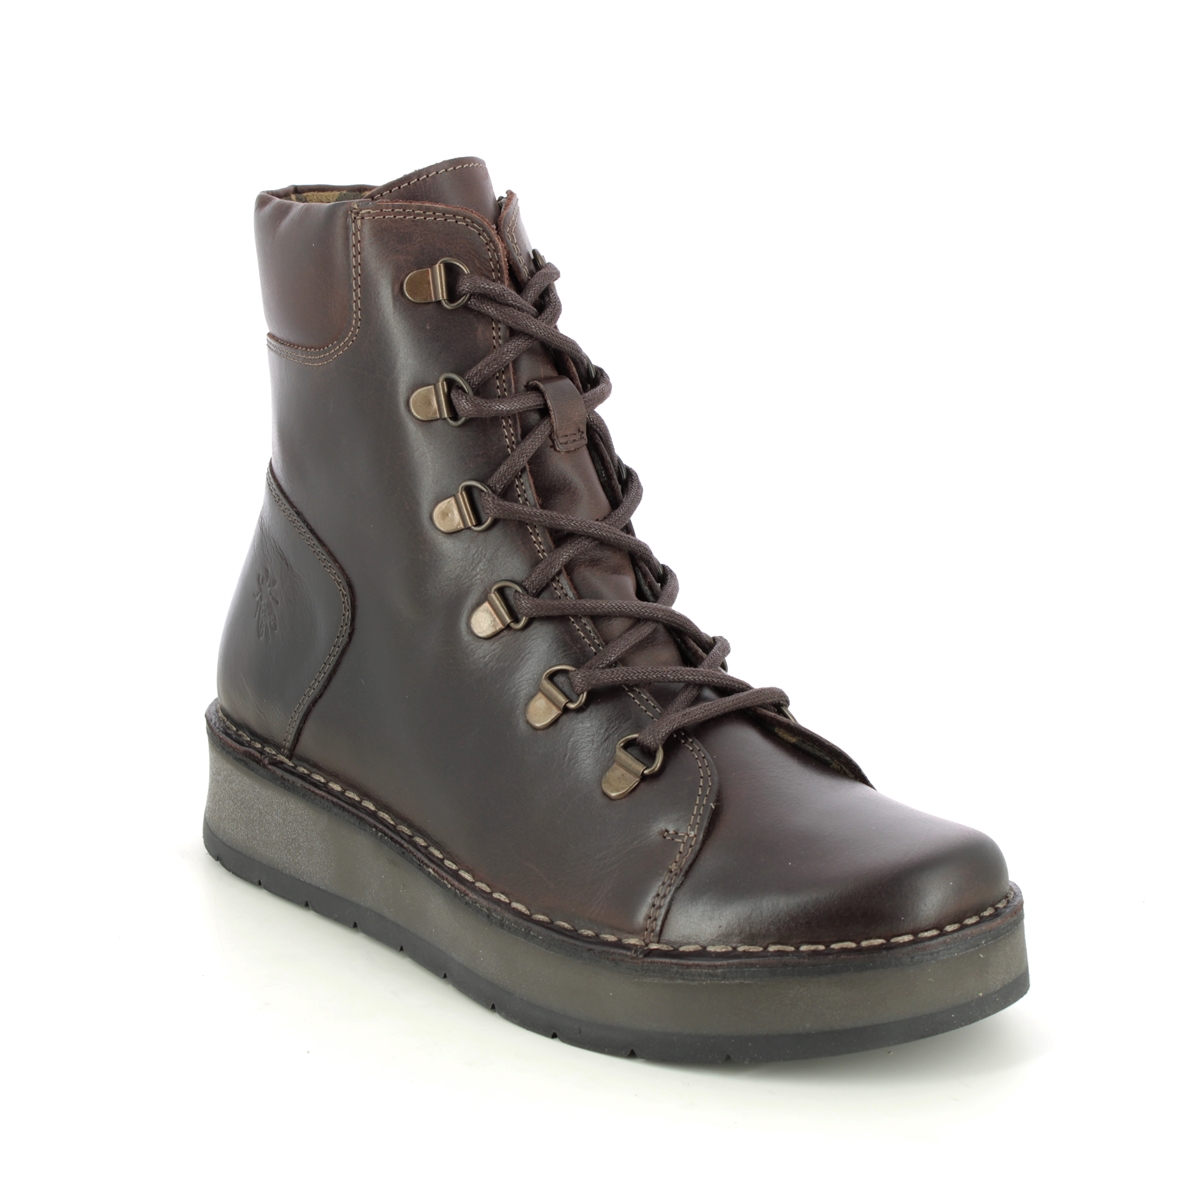 Fly London Roxy Ravi Brown leather Womens Lace Up Boots P211094-001